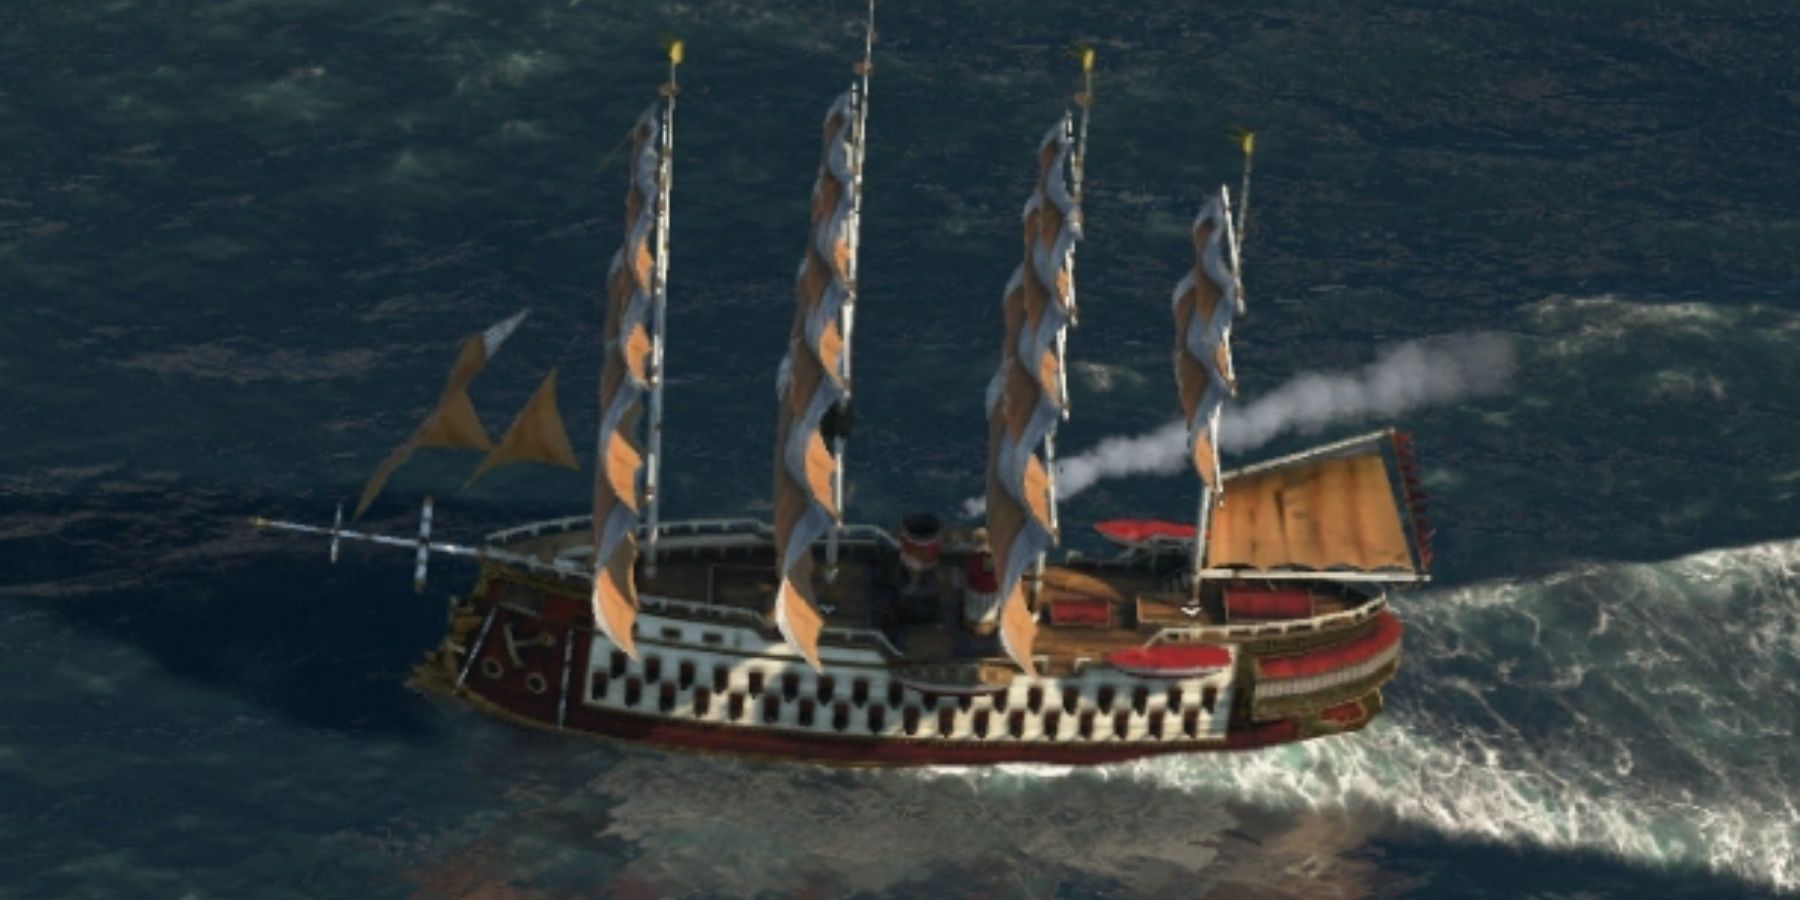 Royal Ship-of-the-line in anno 1800